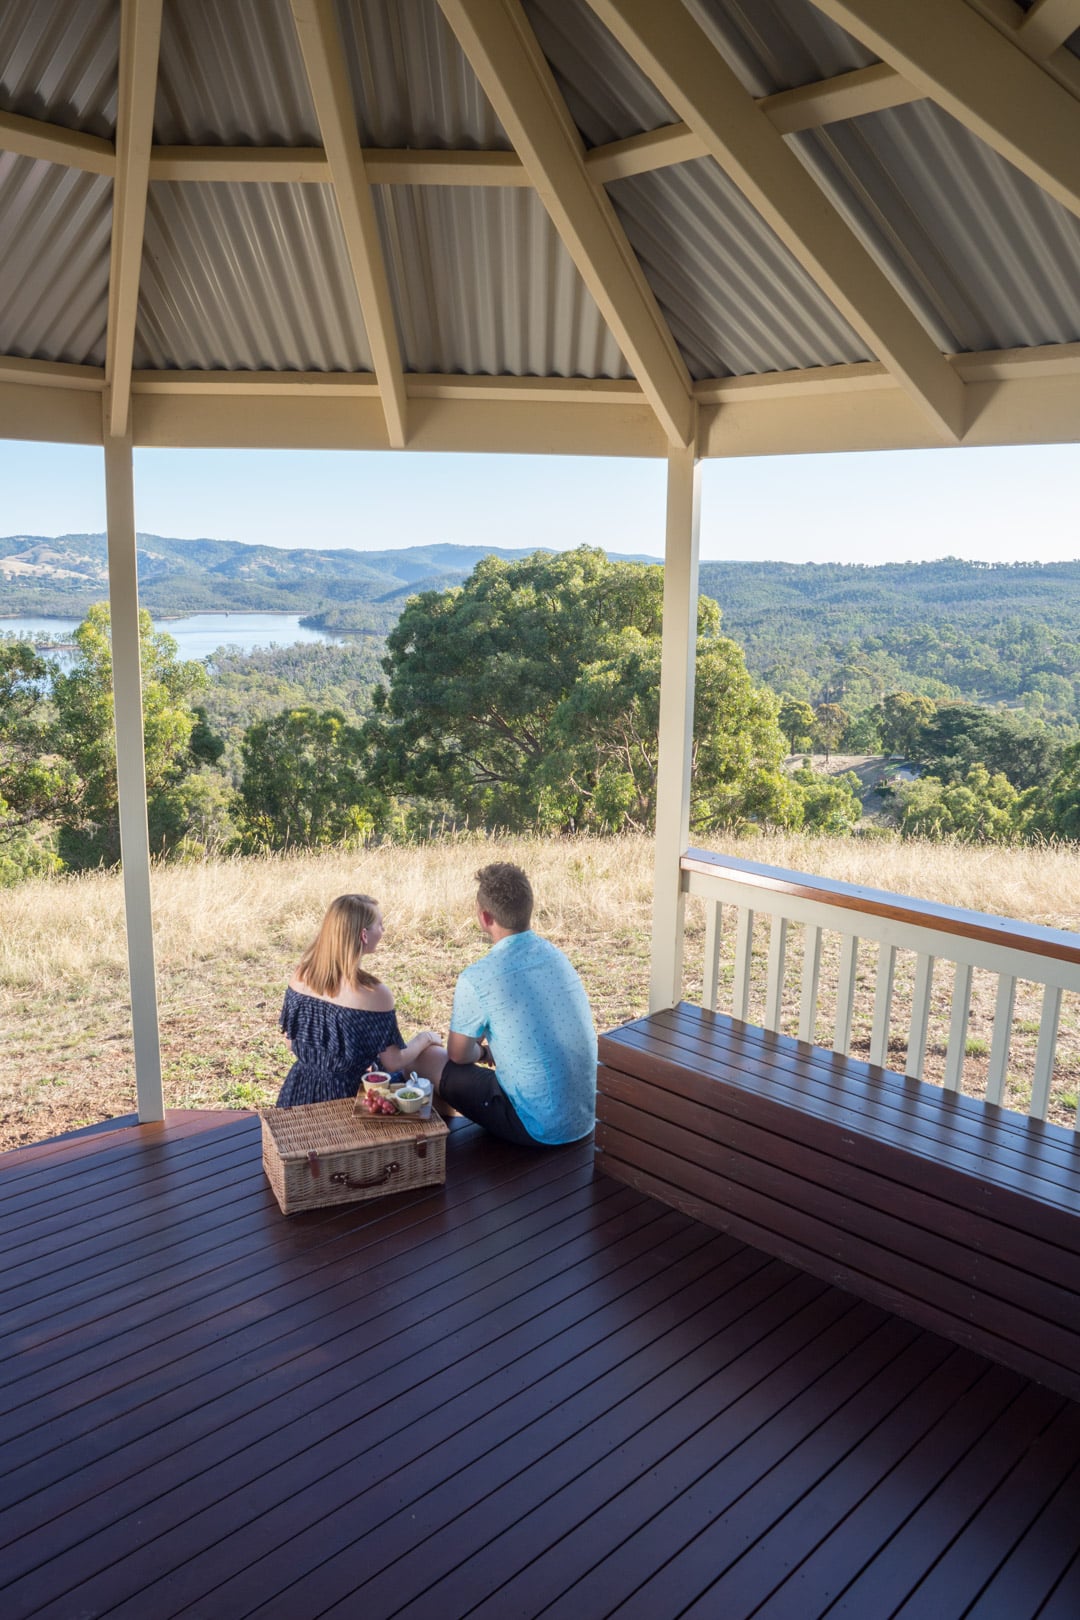 A helpful guide to buying a pergola or verandah - A gazebo will create the perfect spot for a picnic, Australian Outdoor Living.